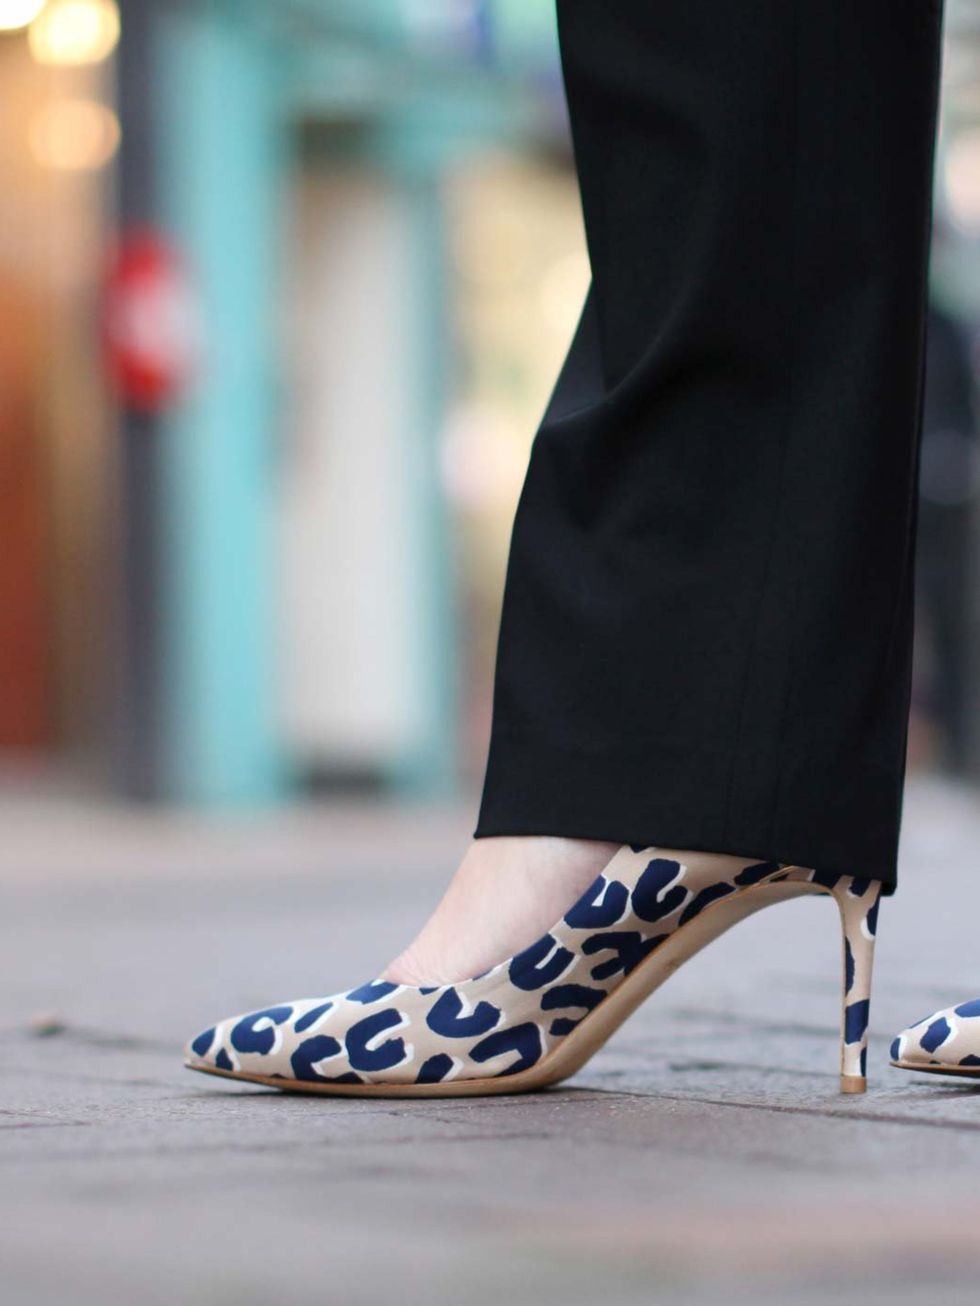 <p>Lorraine Candy, ELLE Editor-in-Chief, Louis Vuitton shoes.</p><p><a href="http://www.elleuk.com/style/street-style/round-up-of-the-best-street-style-of-2013-shot-for-elle"></a></p><p><em><a href="http://www.elleuk.com/style/what-elle-wears">See what EL